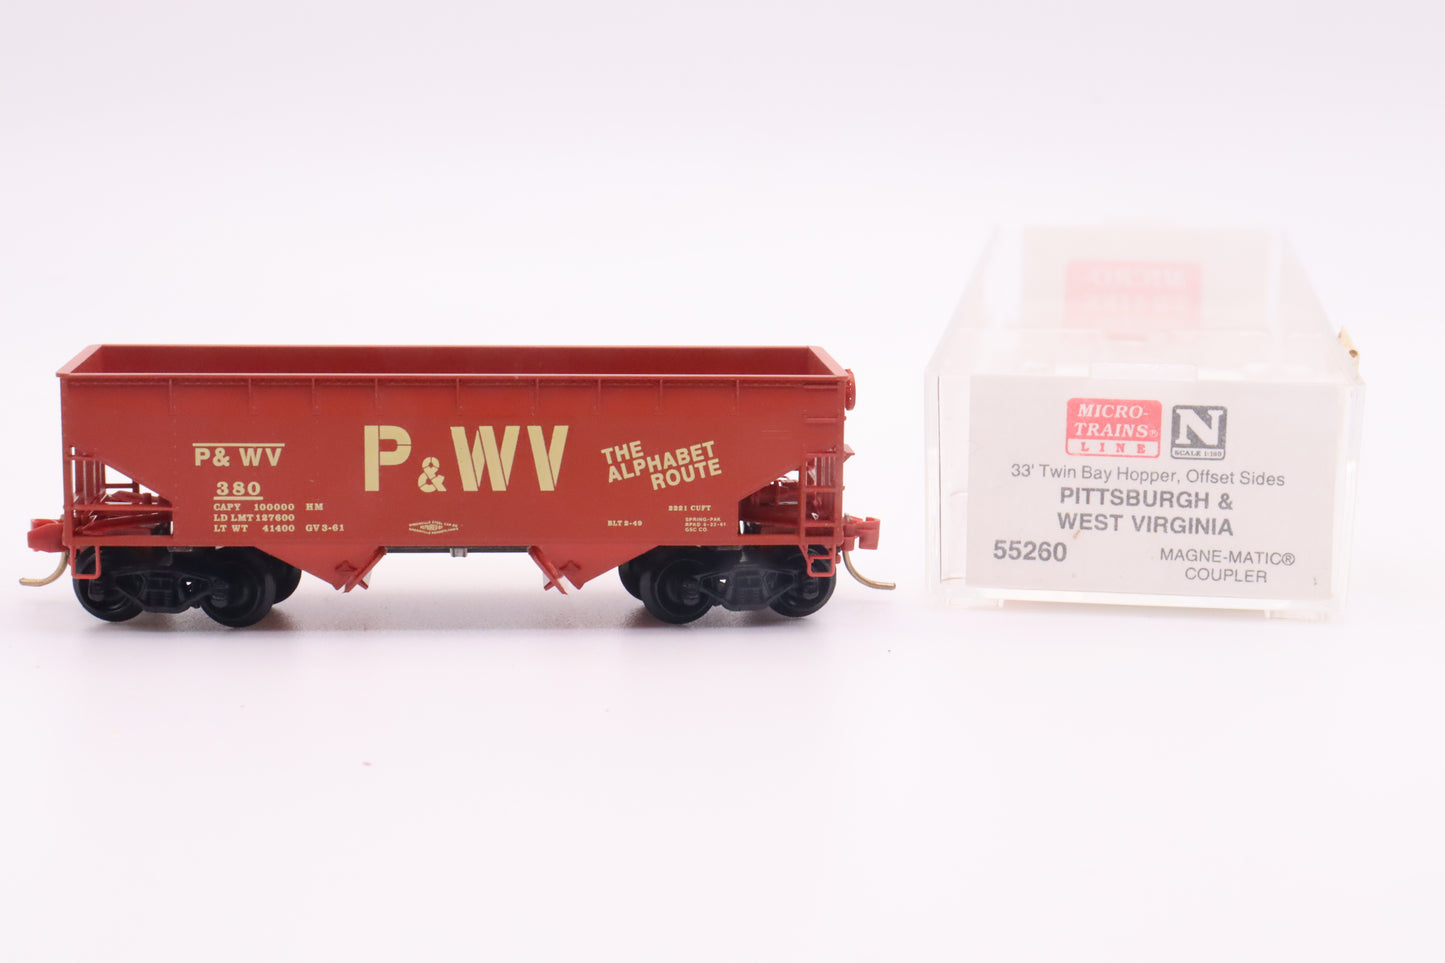 MTL-55260 - 33' Twin Bay Hopper, Offset Sides - Pittsburgh & West Virginia - P&WV-380